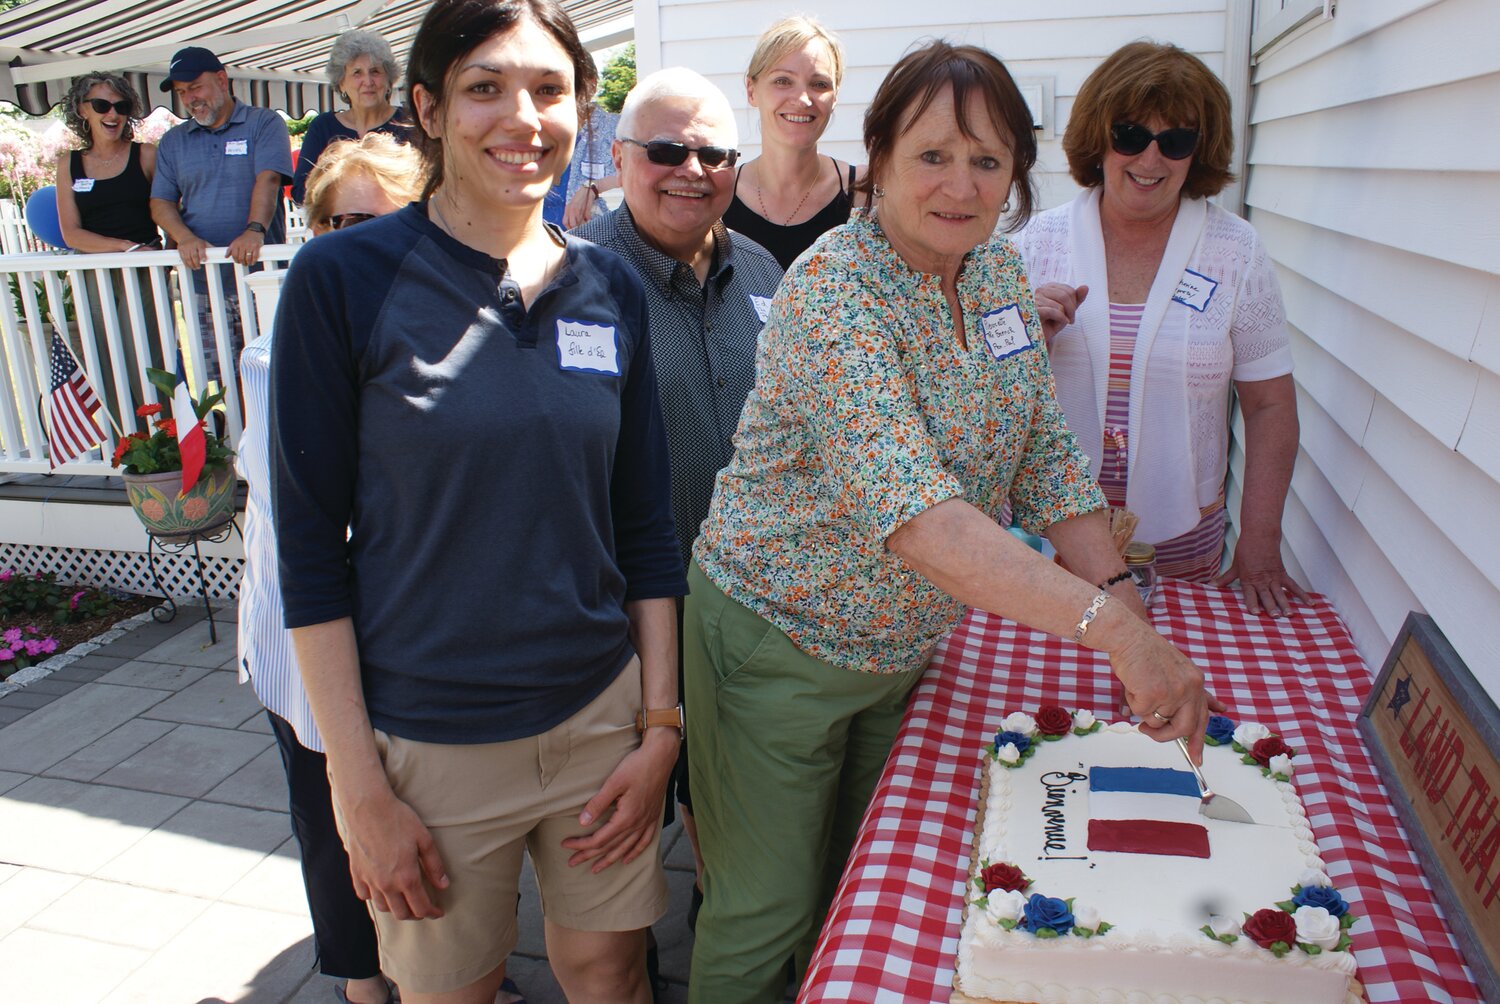 IT’S A PICNIC: Supportive friends, neighbors and family happily join together to greet their guests from France. At right Pierrete cuts into the ceremonial welcome cake decorated with the French flag as Laura, Ed, Mylene and family Catherine Conant look on.